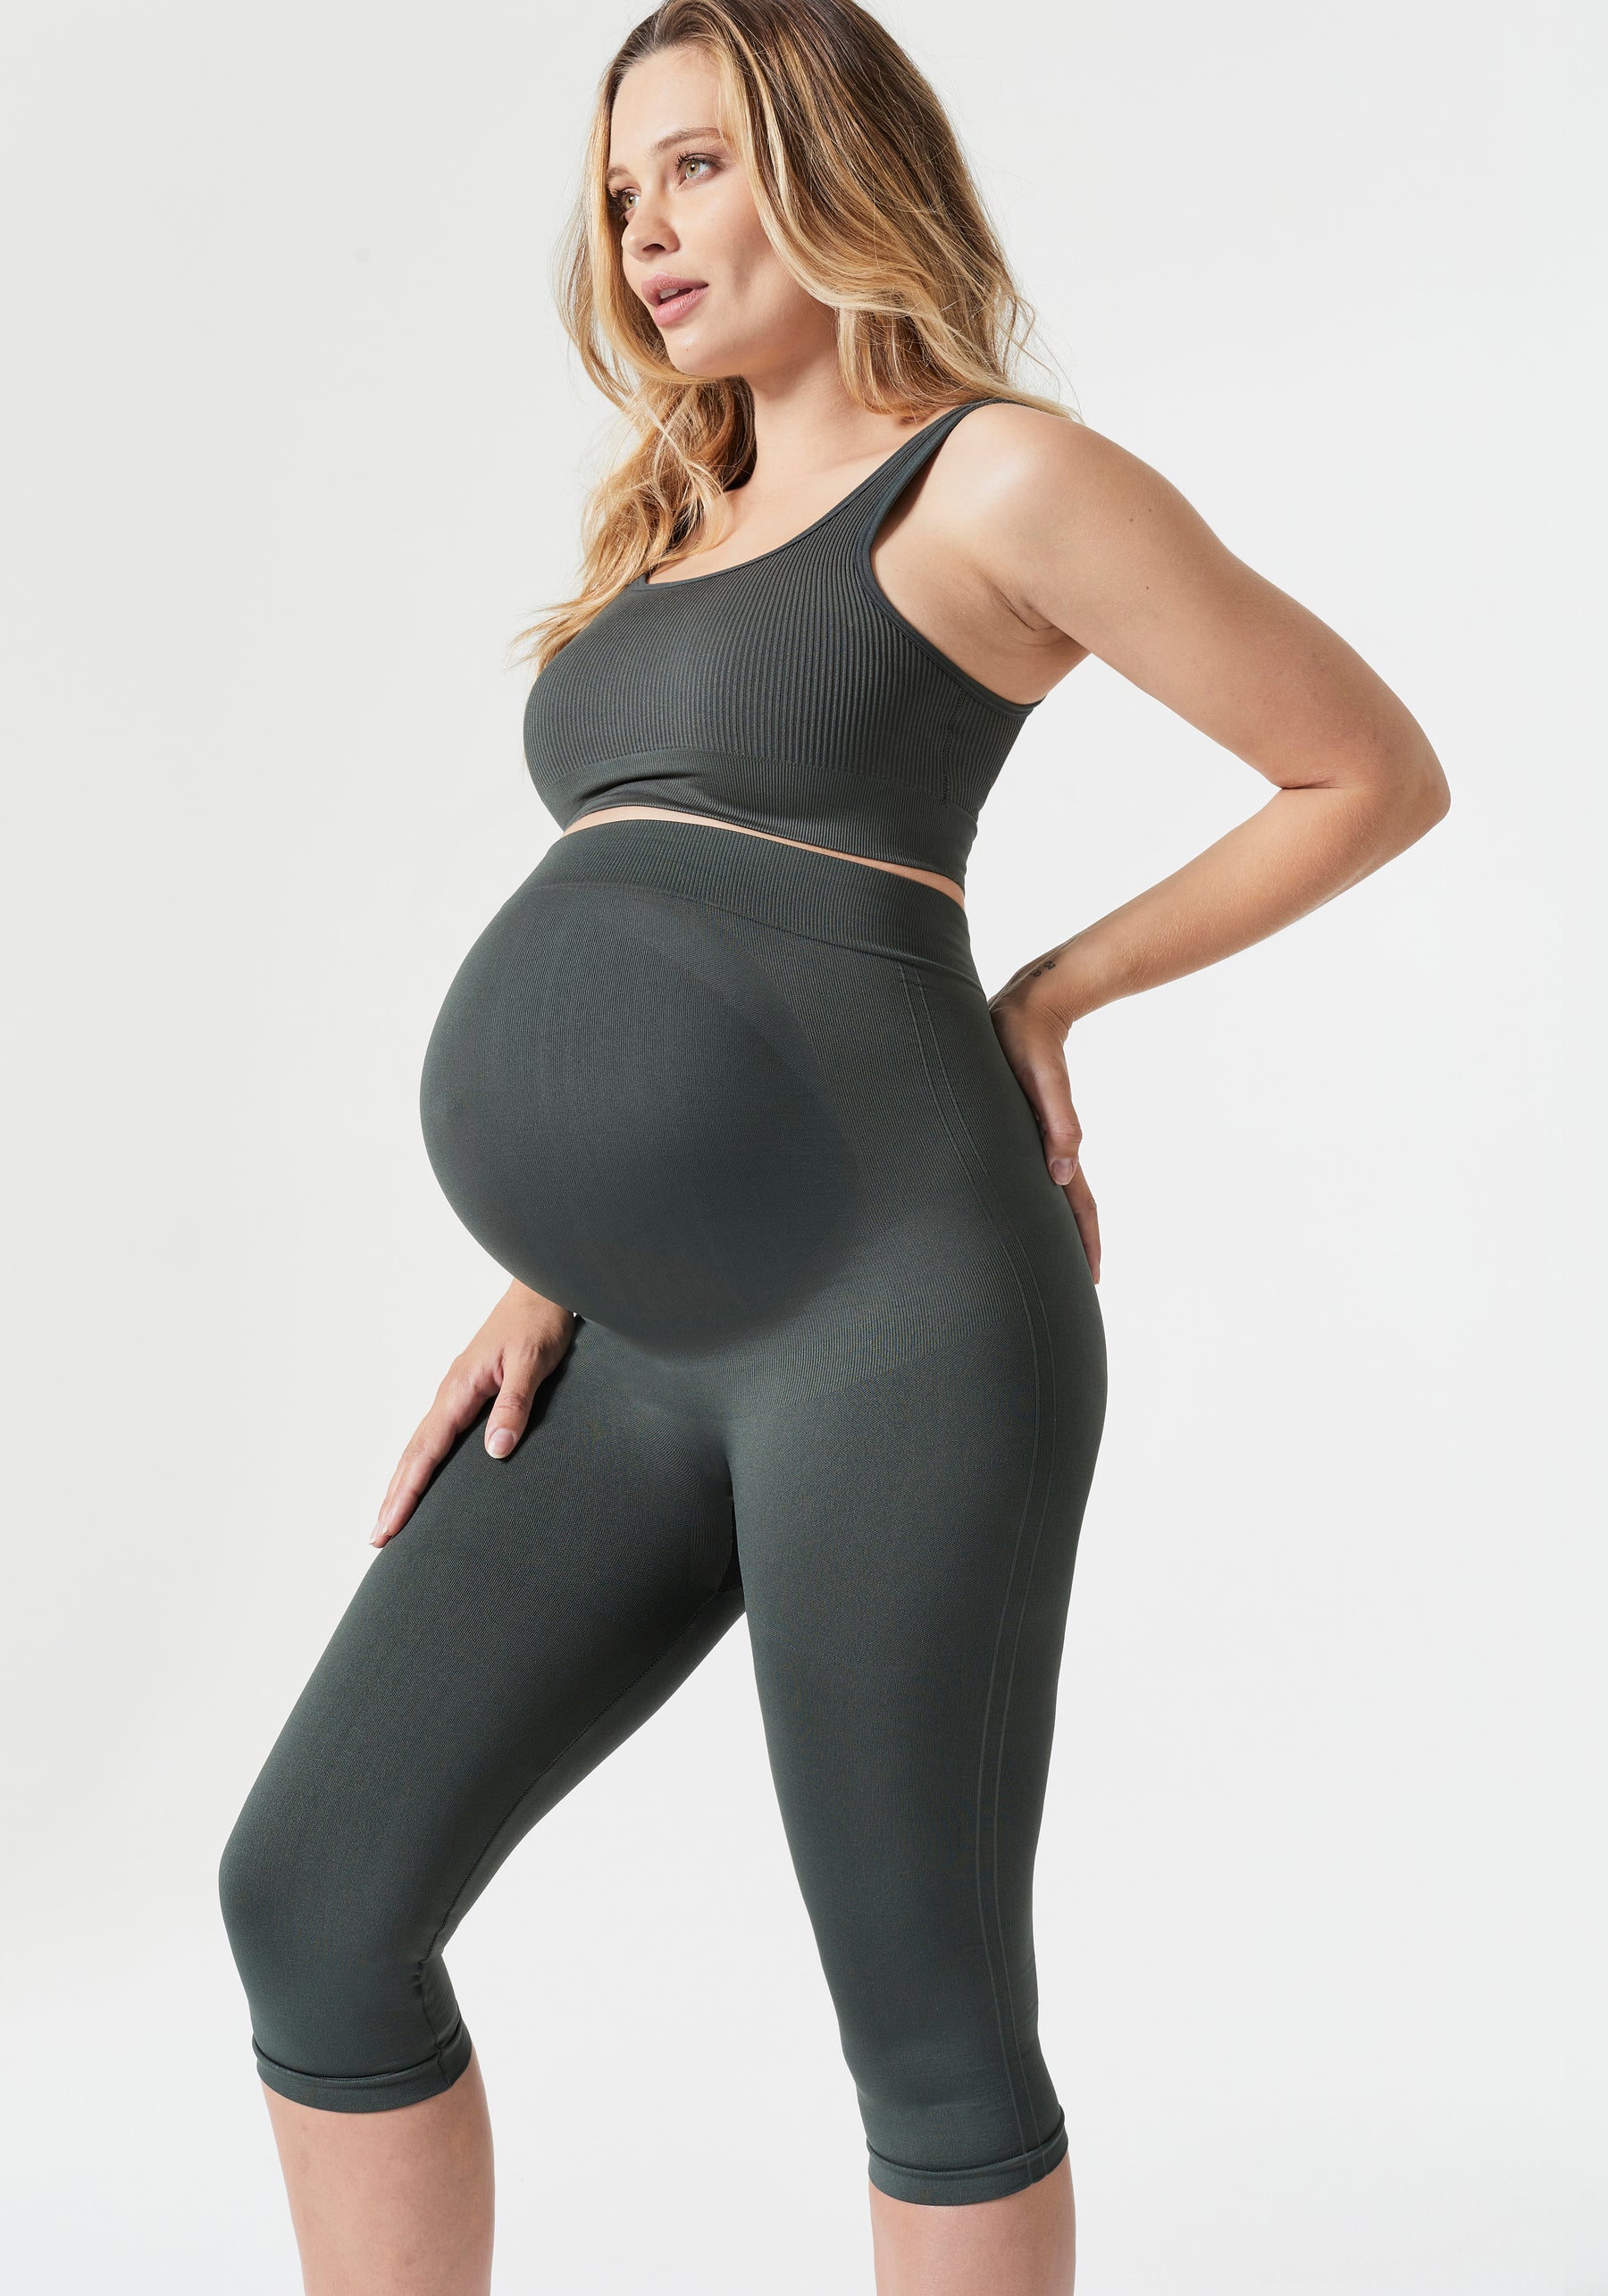 Poshdivah Over the Belly Maternity Leggings sz Medium Color: Army Green -  $17 - From Beatriz